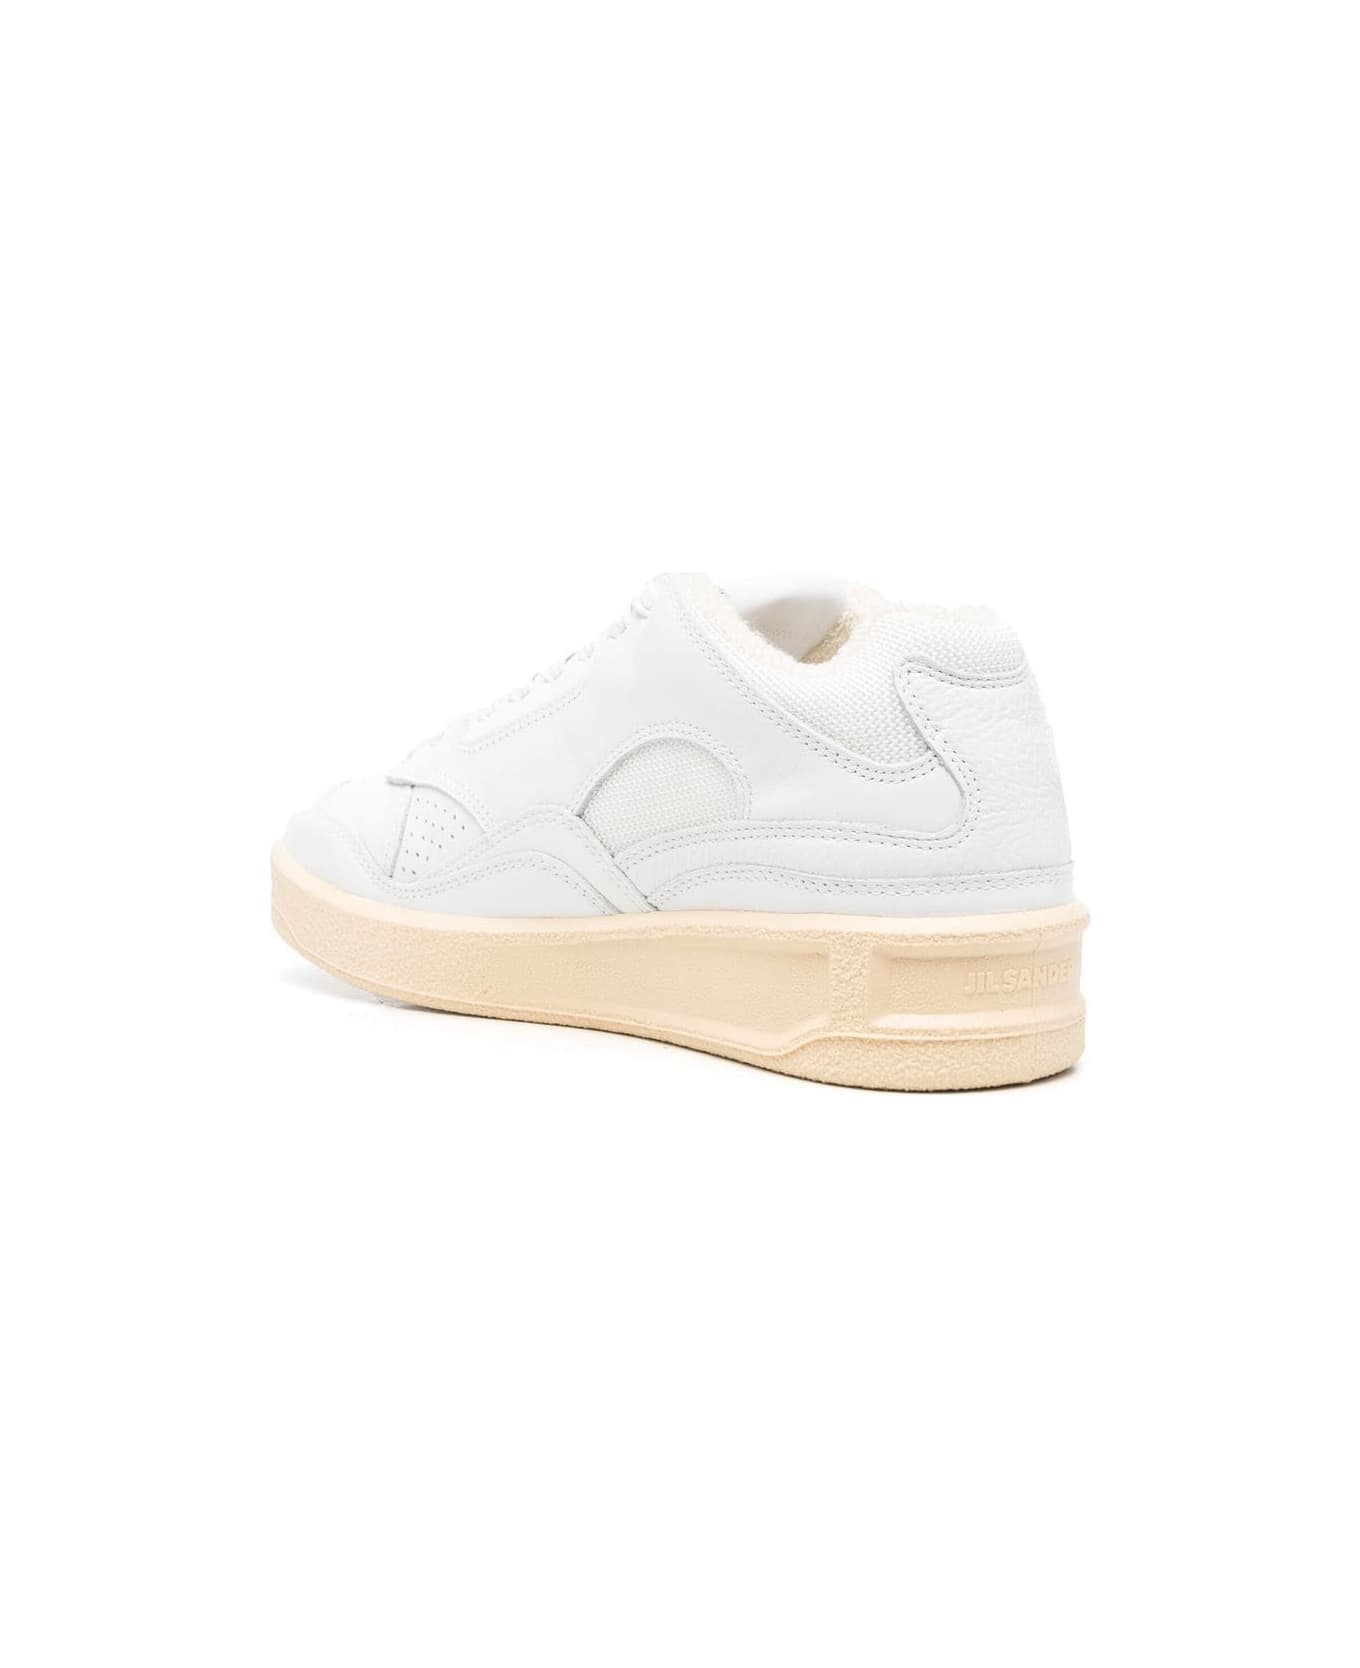 Jil Sander Cow Leather And Fabric Mesh Mid Cut Sneakers - White Ecru